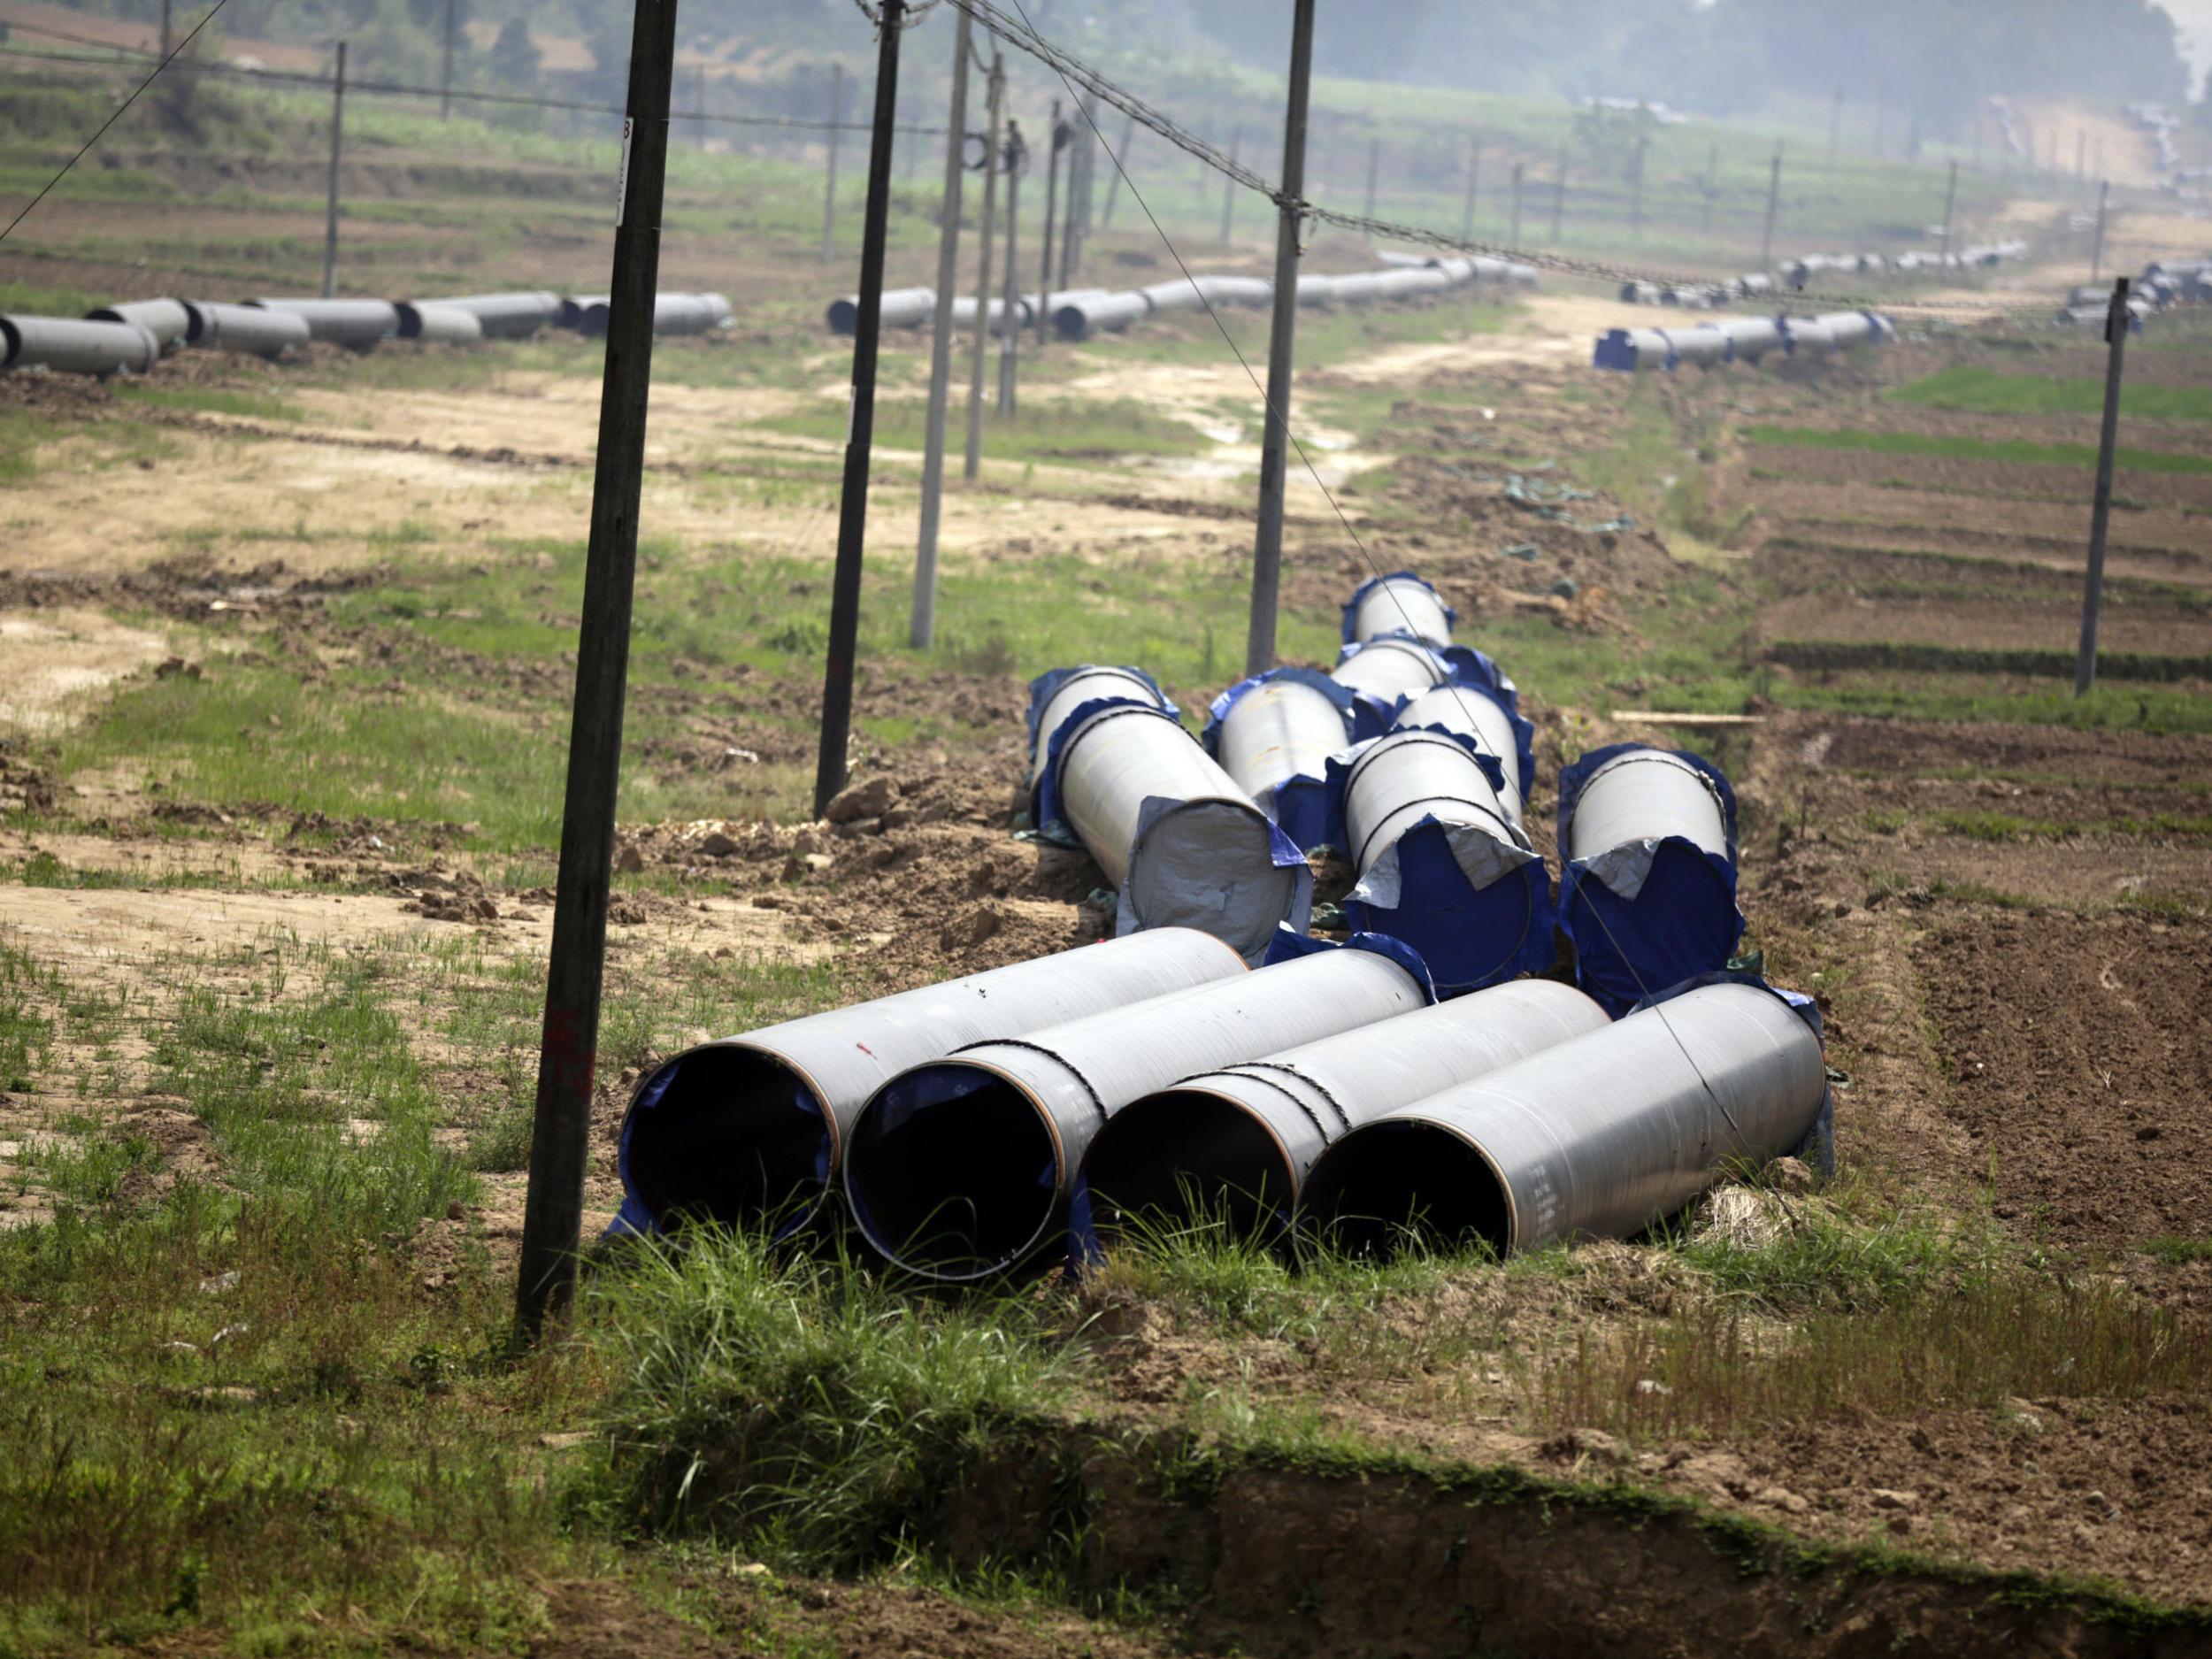 A Saudi oil pipeline under construction near the Burmese border with China. Riyadh has oil and gas networks passing through Rakhine state, where Burma's persecuted Rohingya live, but has done little to help